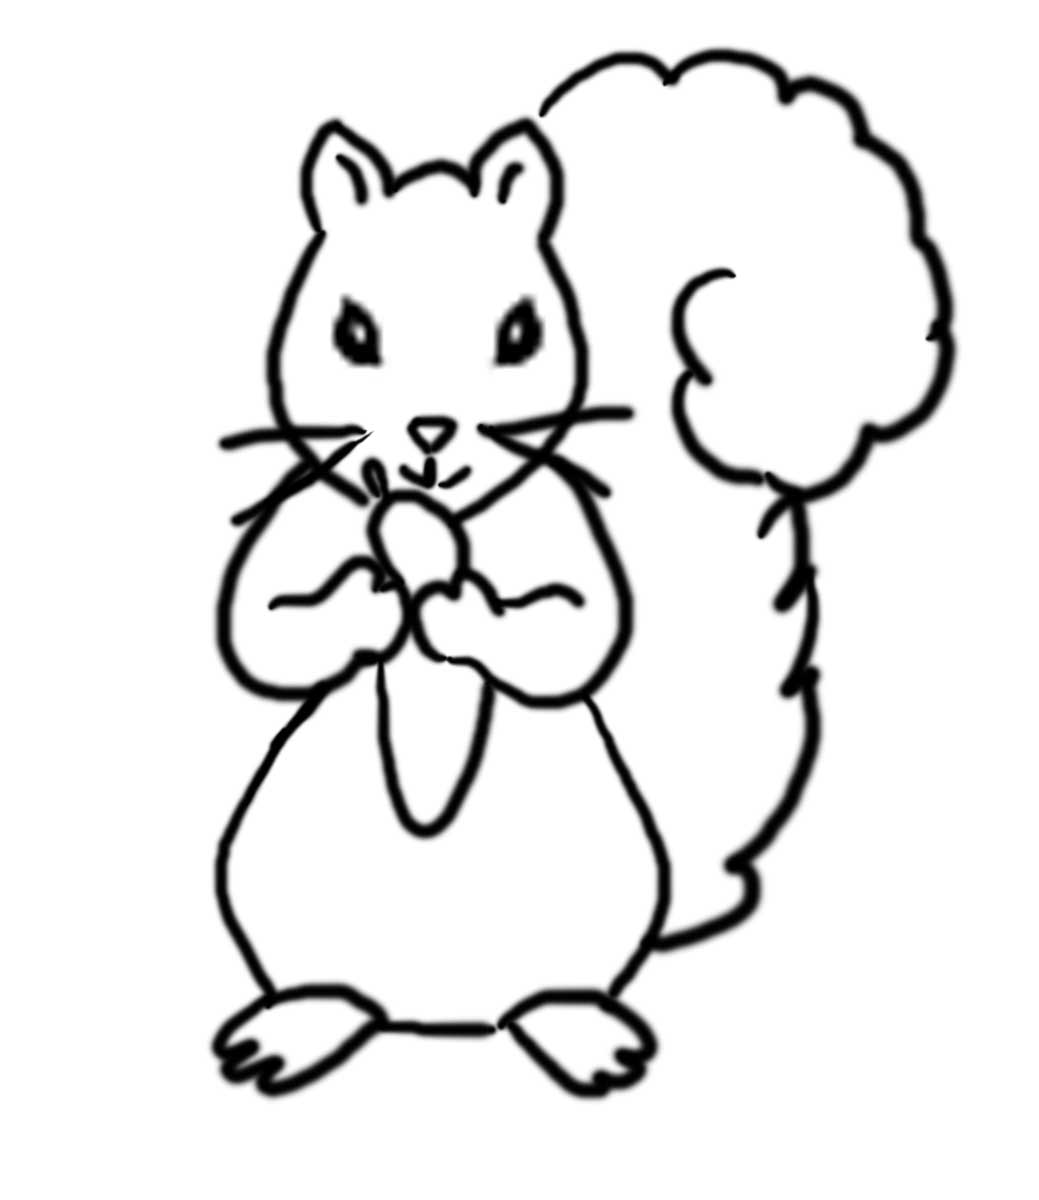 Squirrel coloring page - Coloring Pages & Pictures - IMAGIXS